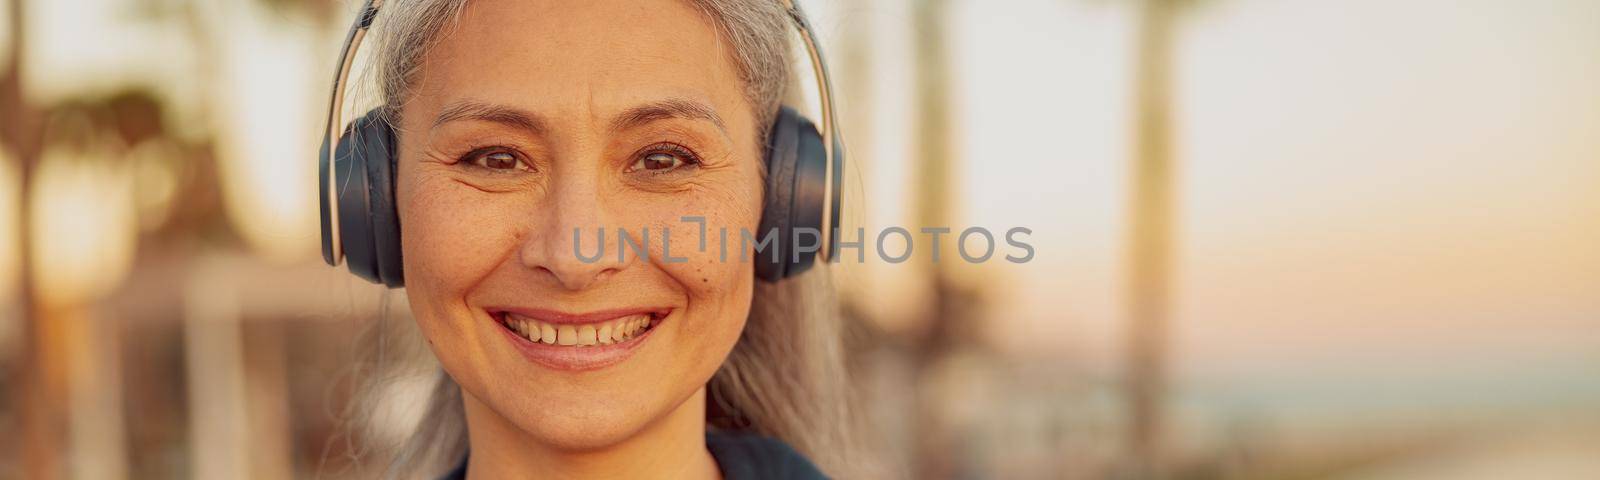 Close-up photo of Asian lady smiling at camera, wearing headphones and black hoodie on background of seafront with palm trees